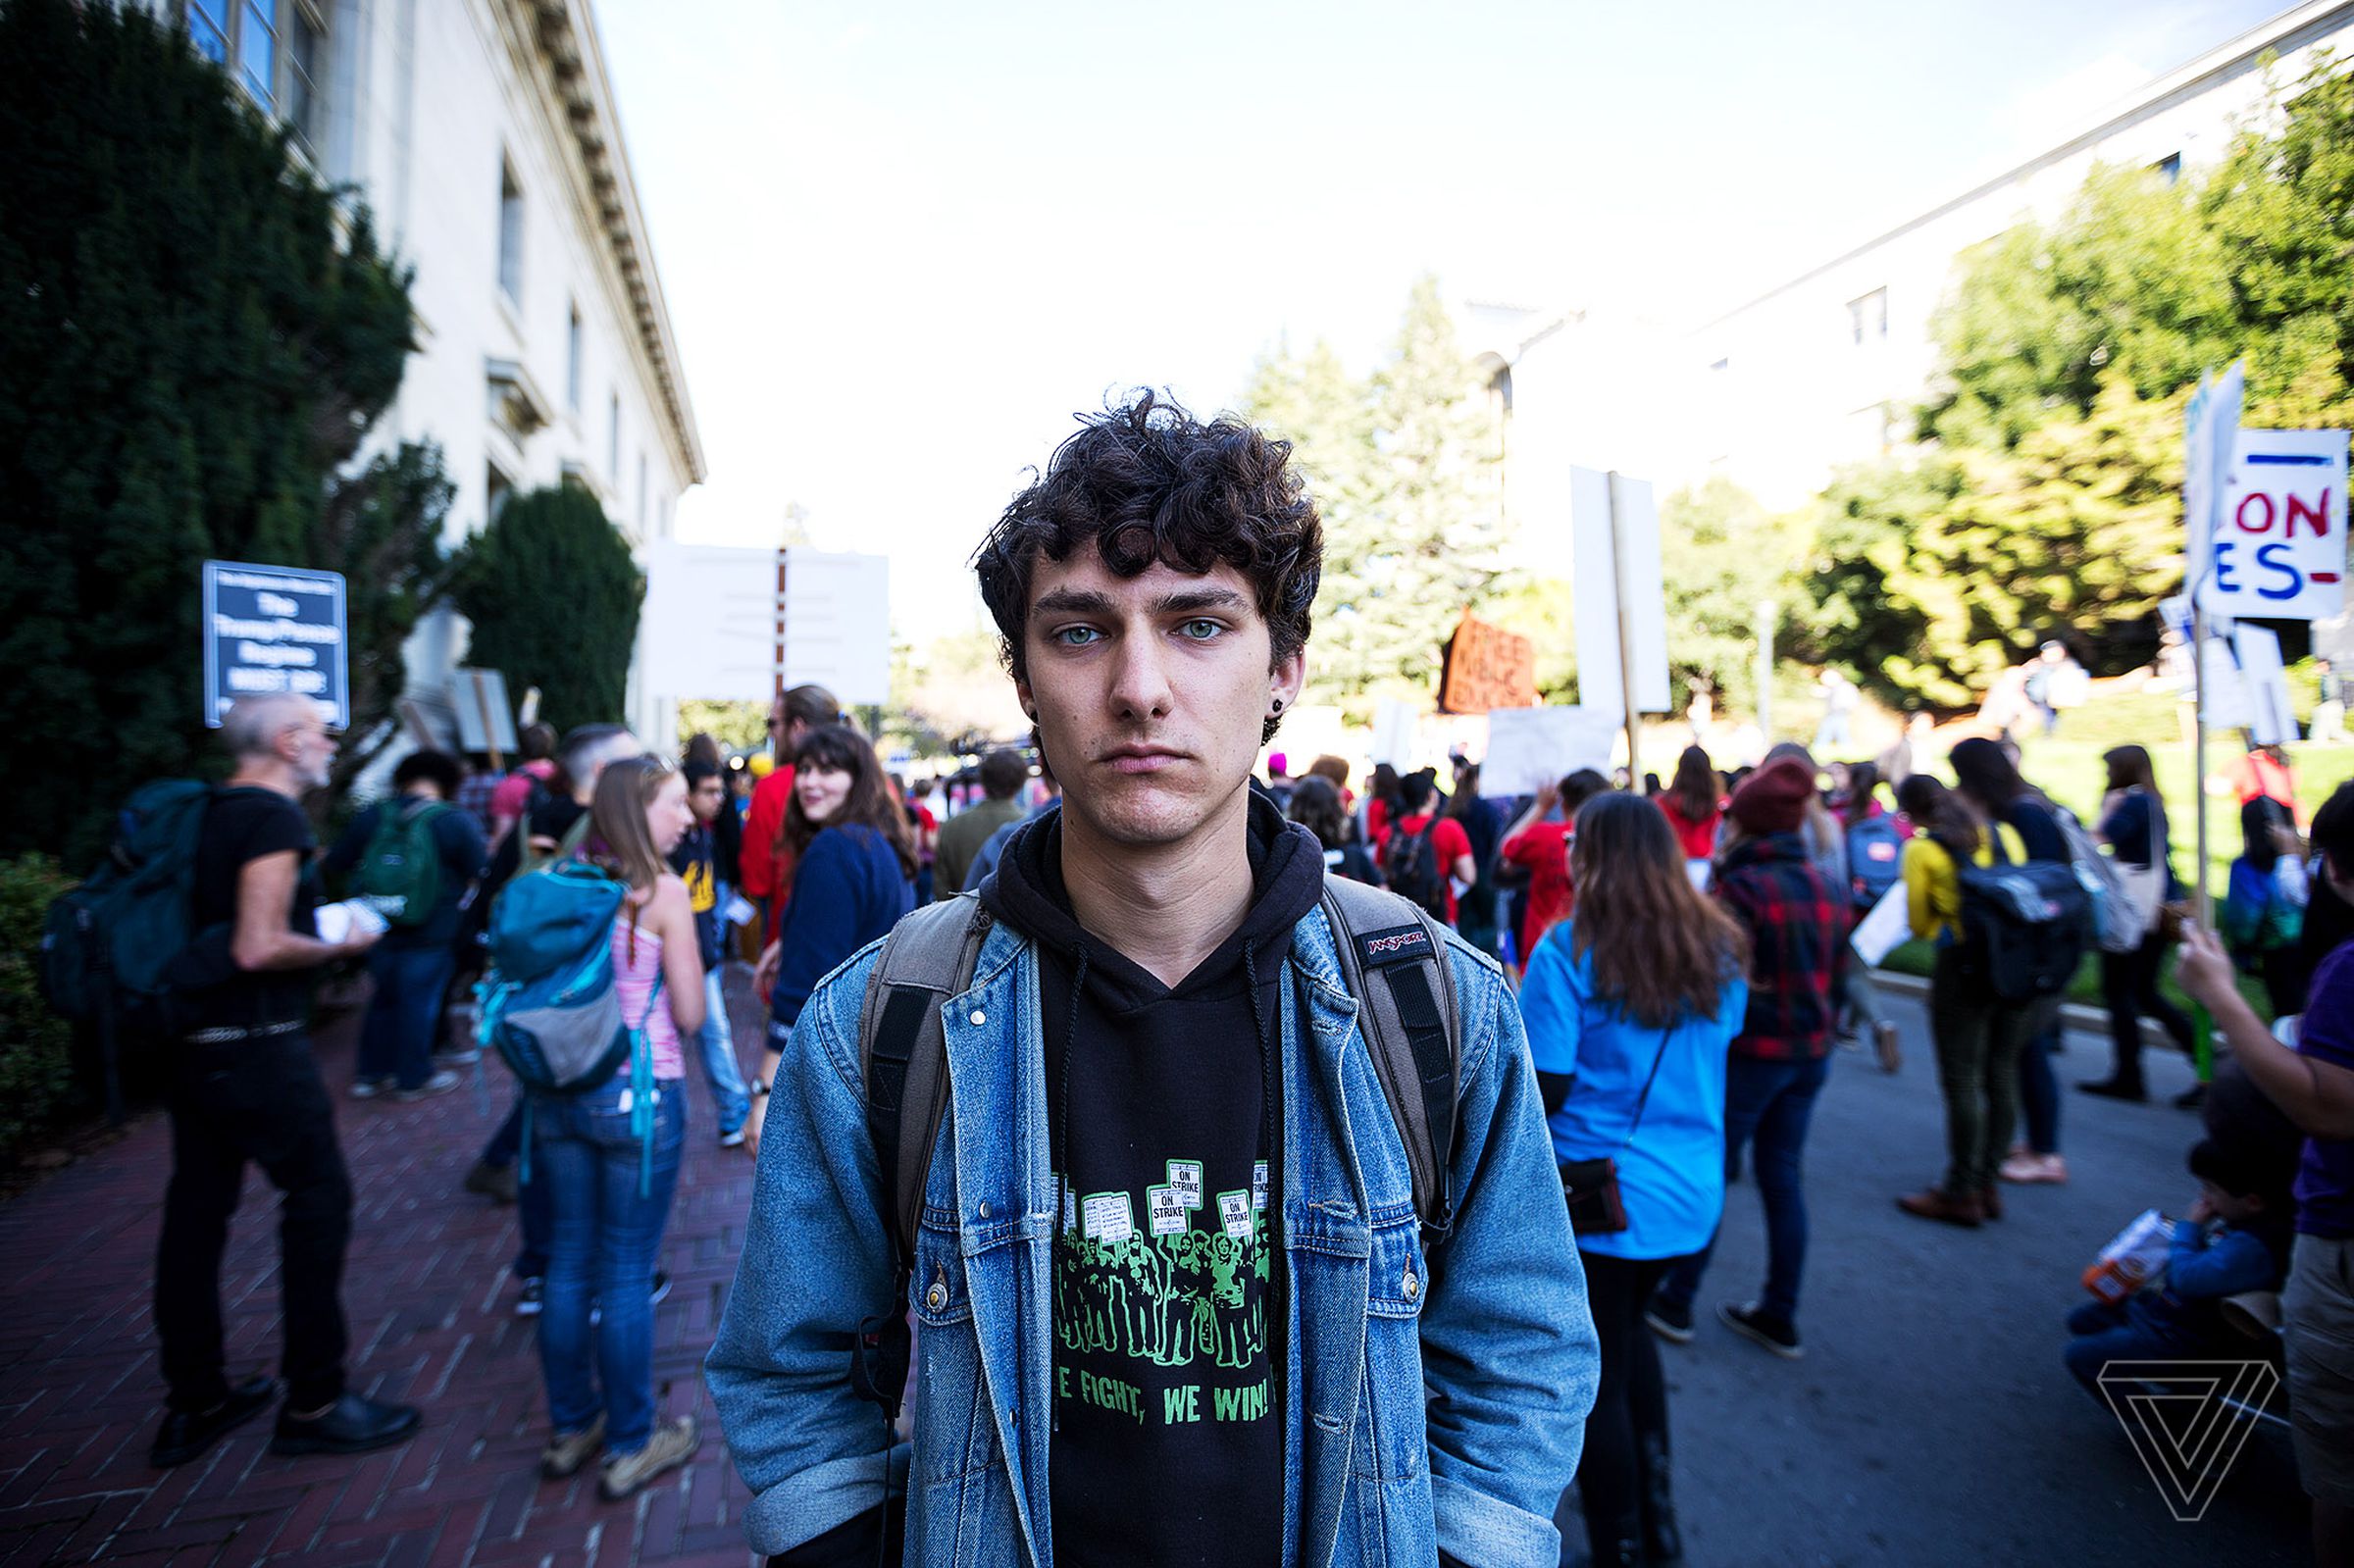 Giovanni D’Ambrosio, an undergraduate at UC Berkeley whose family has experienced homelessness, said that the tax bill is making him reconsider his plans to go to graduate school: “I'm in a catch-22, where if I don't get a master's I don't know how I'm go